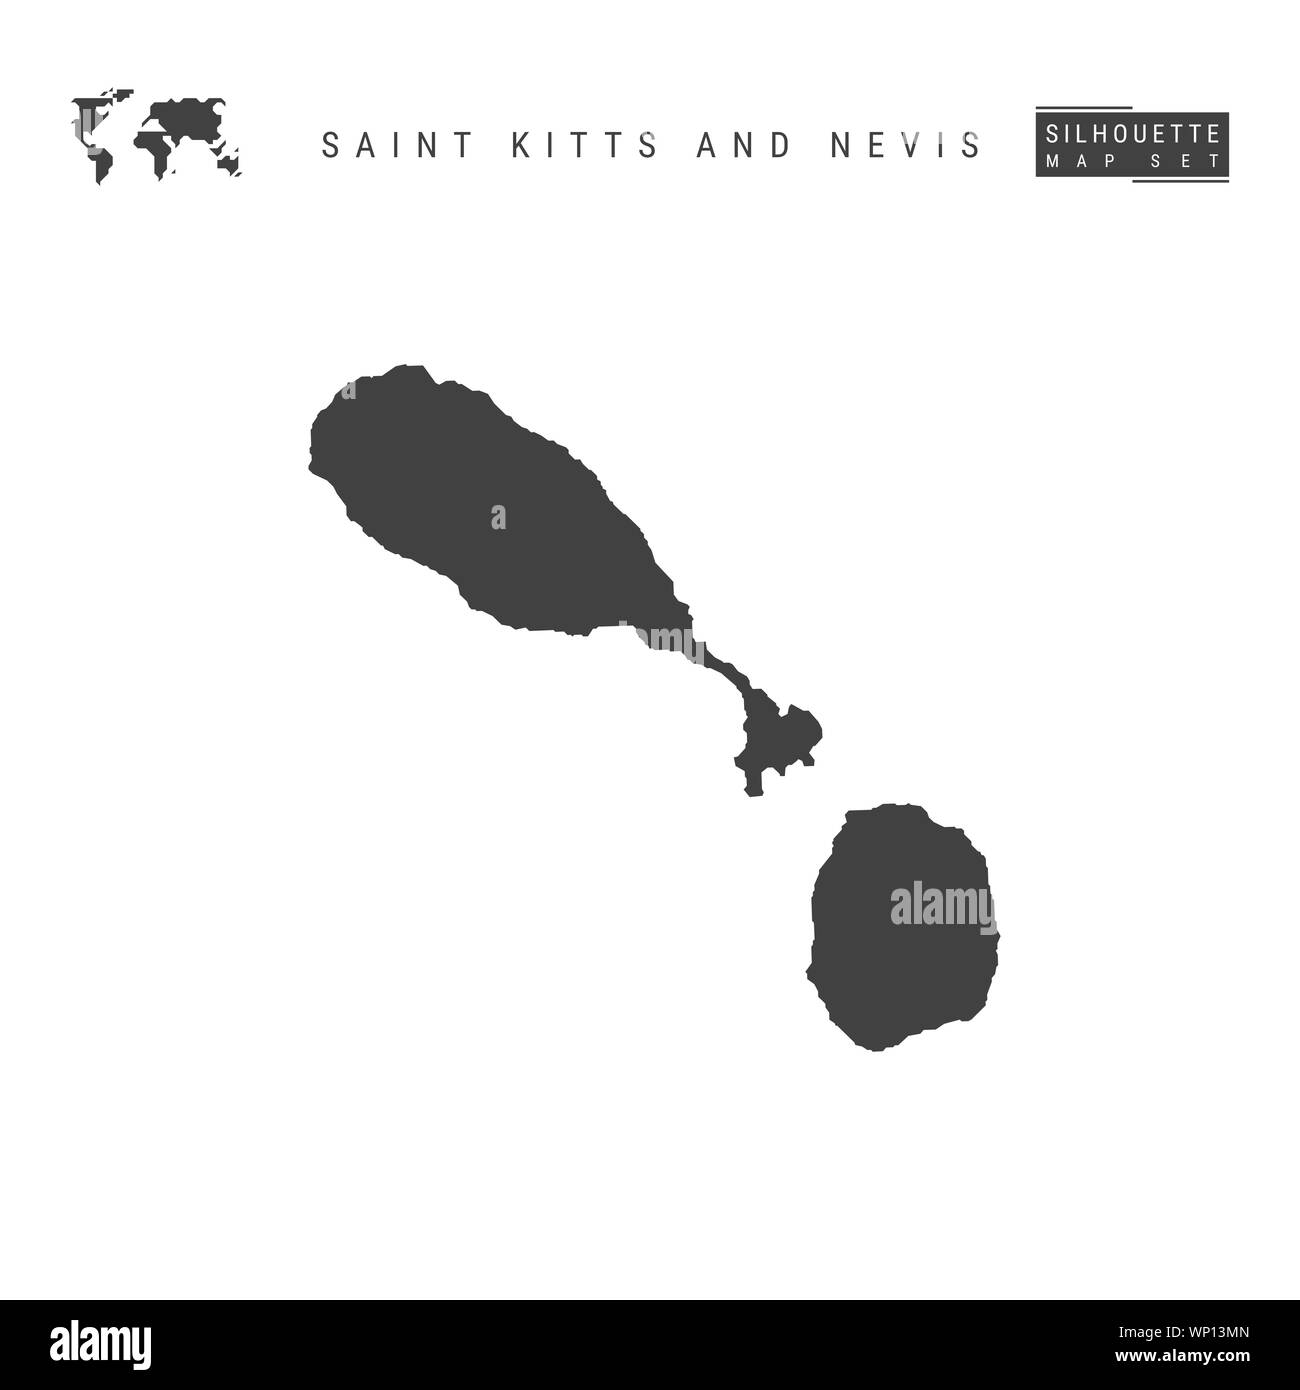 Saint Kitts and Nevis Blank Map Isolated on White Background. High-Detailed Black Silhouette Map of Saint Kitts and Nevis. Stock Photo